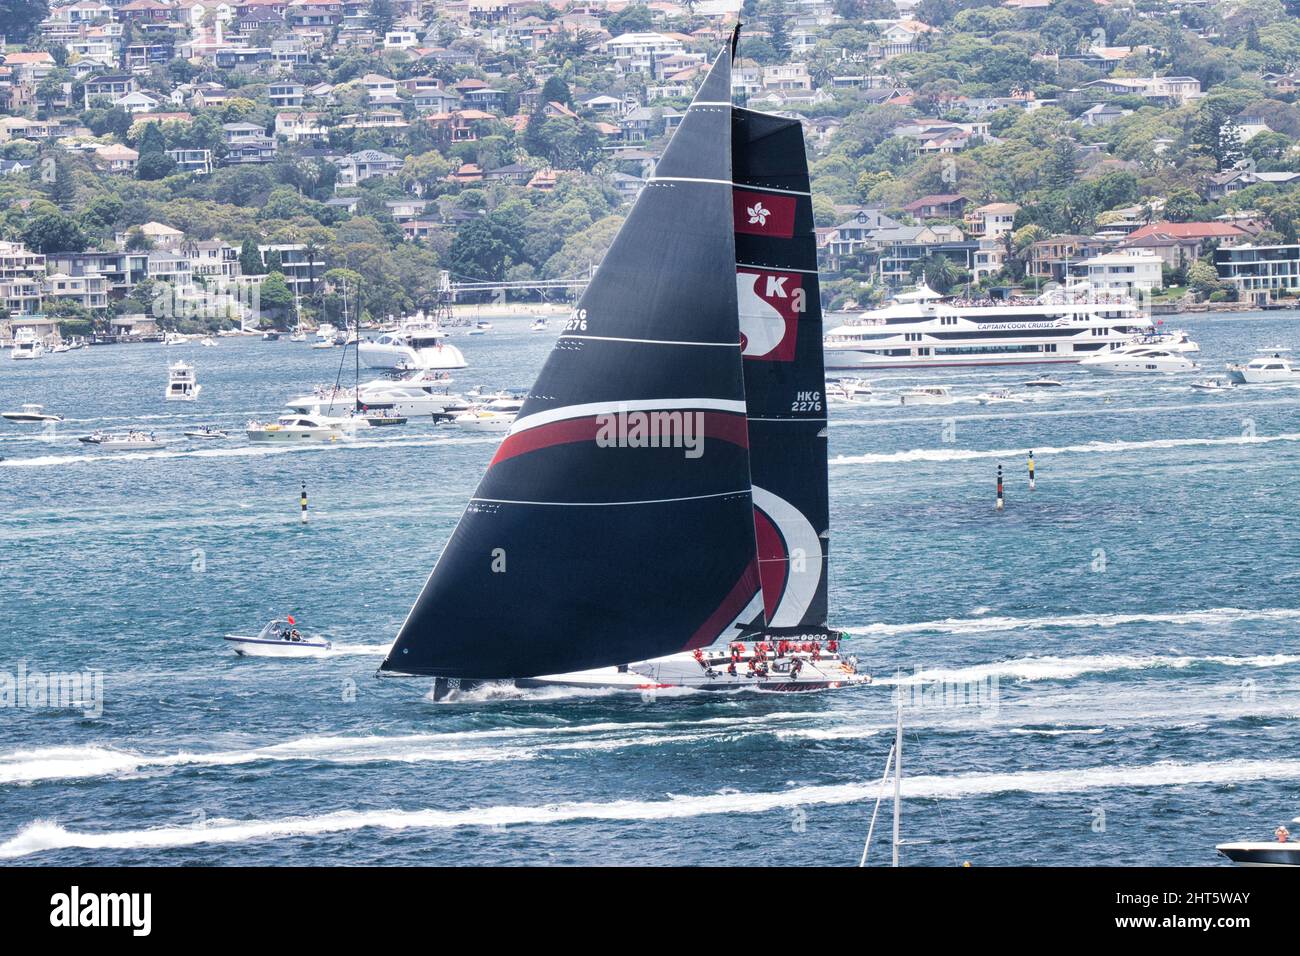 Maxi yacht racing on Sydney Harbour during the 2021 Sydney to Hobart Yacht Race. Stock Photo